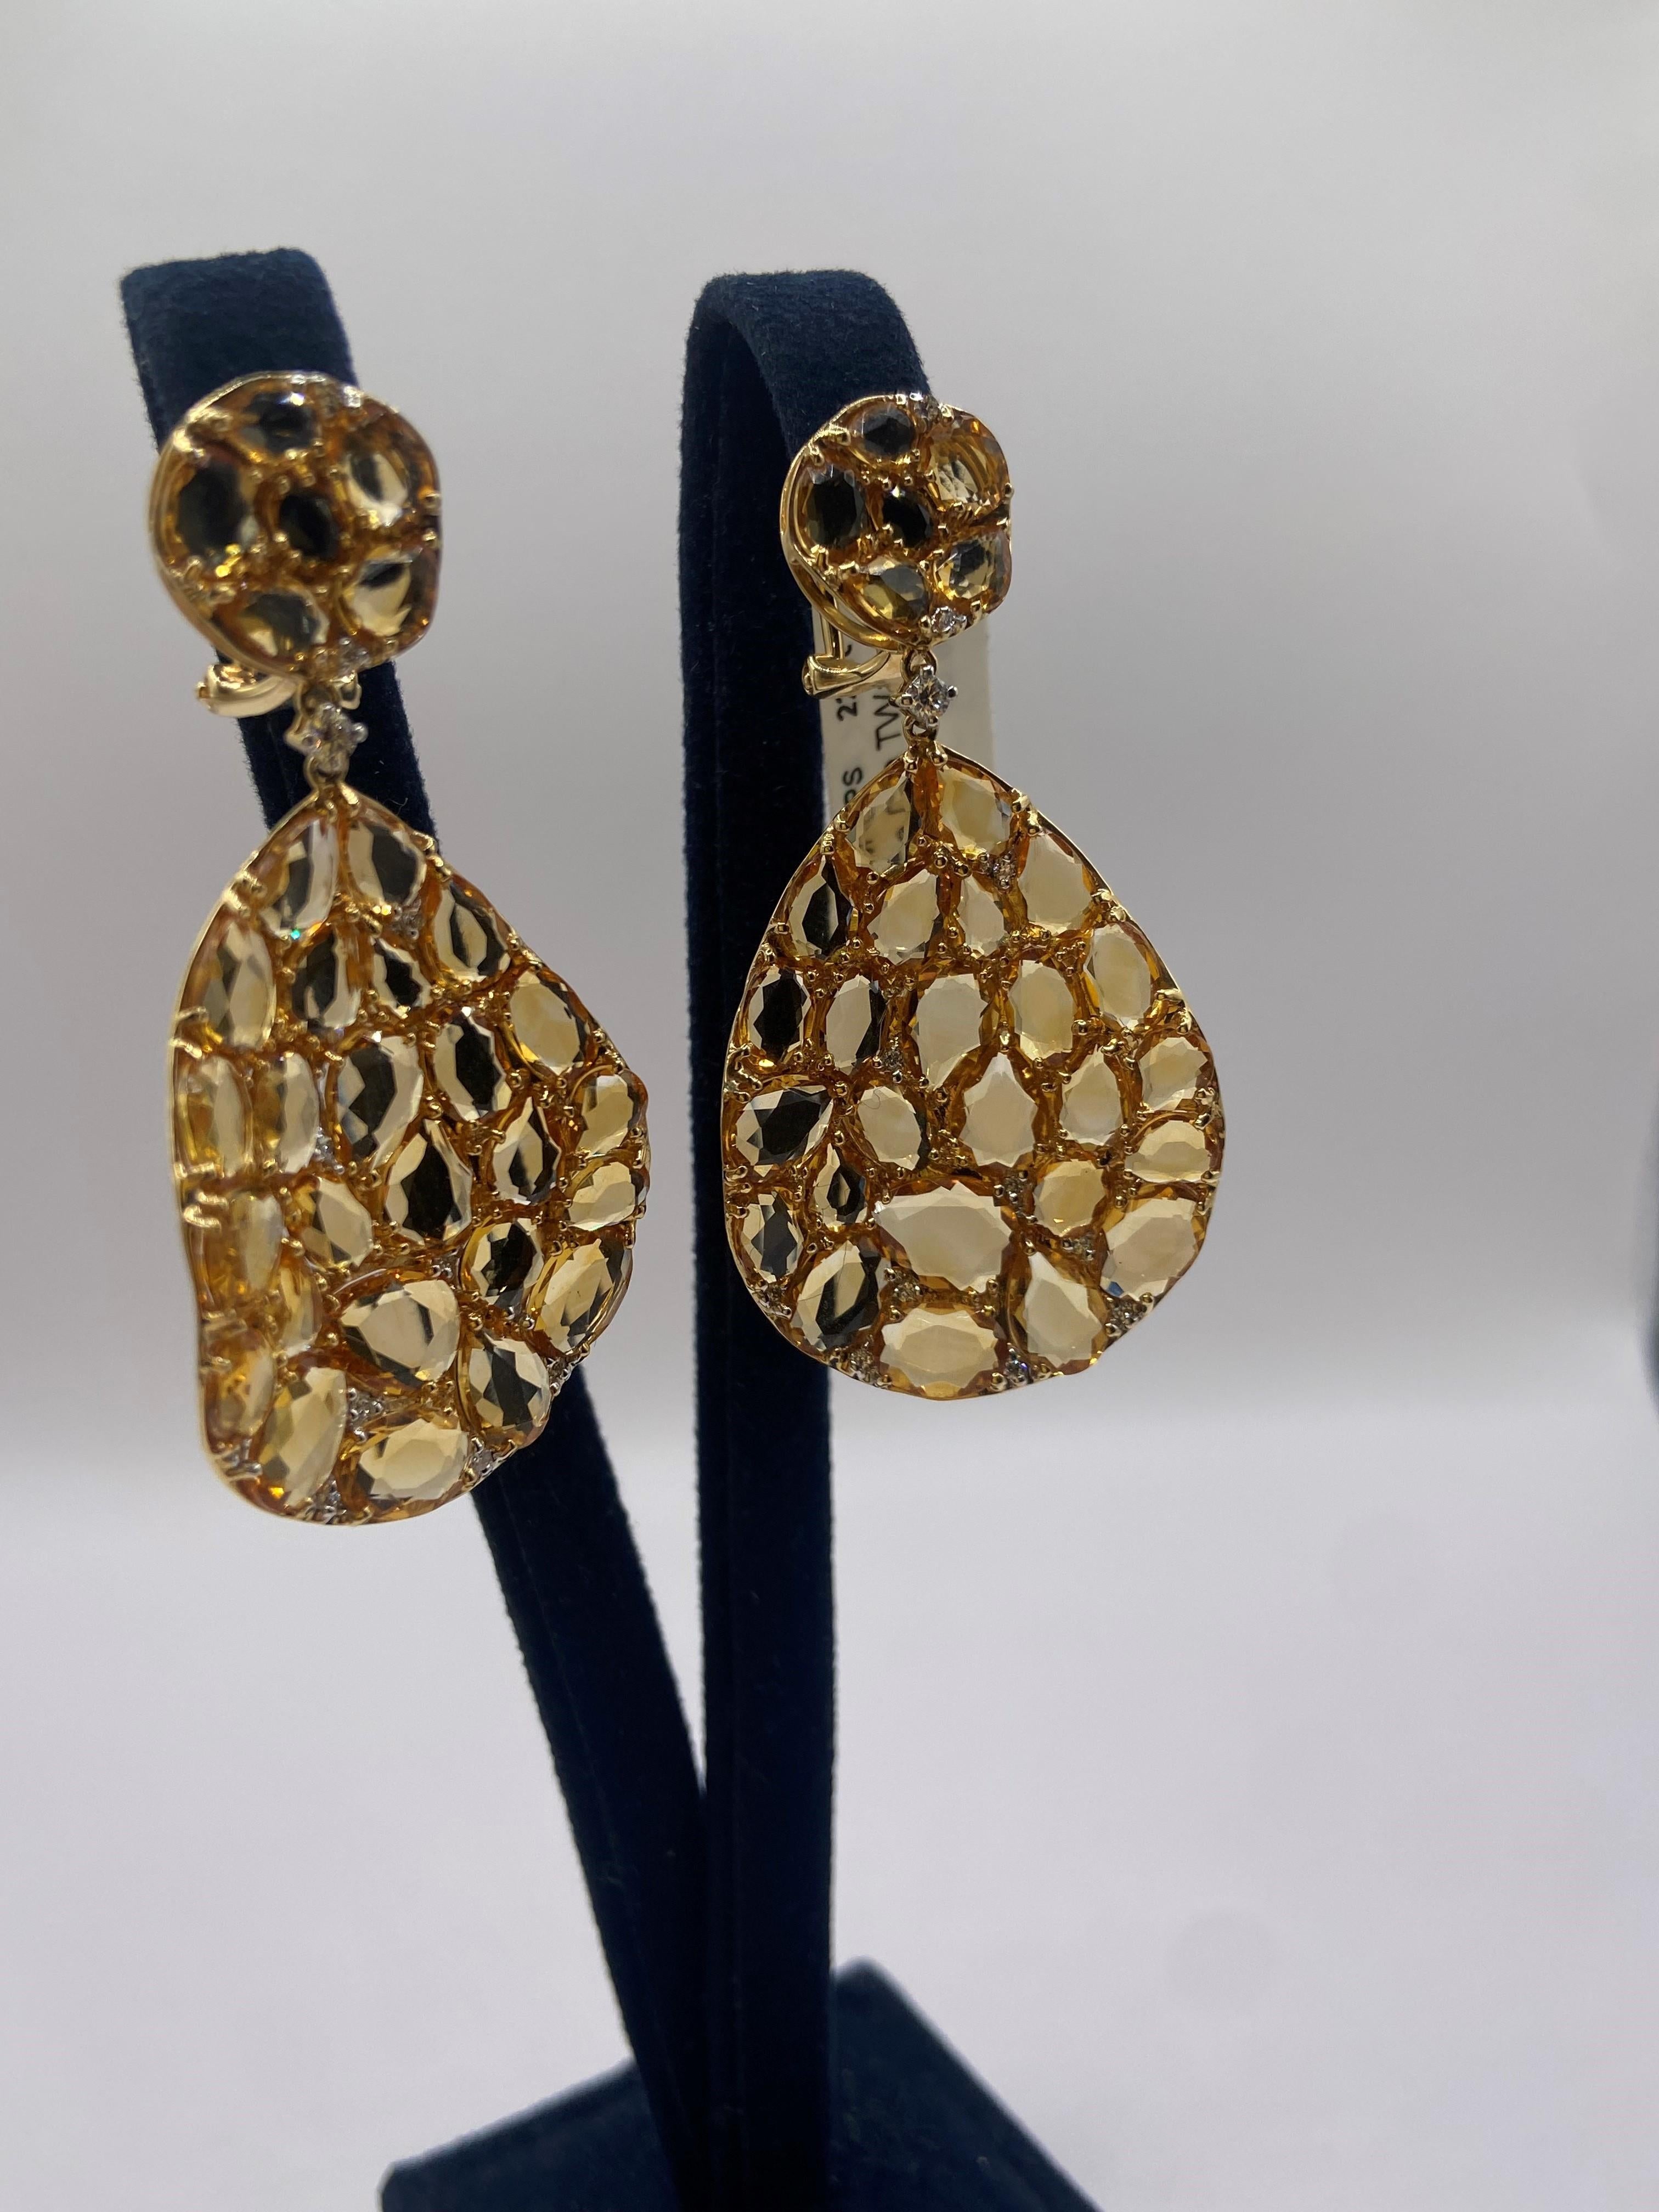 • 18KT Yellow Gold
• 22.32 Carats

• 24 Round Diamonds: 0.22ctw
• Color: F
• Clarity SI1

• Number of Rose Cut Citrines: 62
• Carat Weight: 22.10ctw

This pair of earrings is made with 62 rose cut yellow citrine stones, weighing 22.10 carats. The